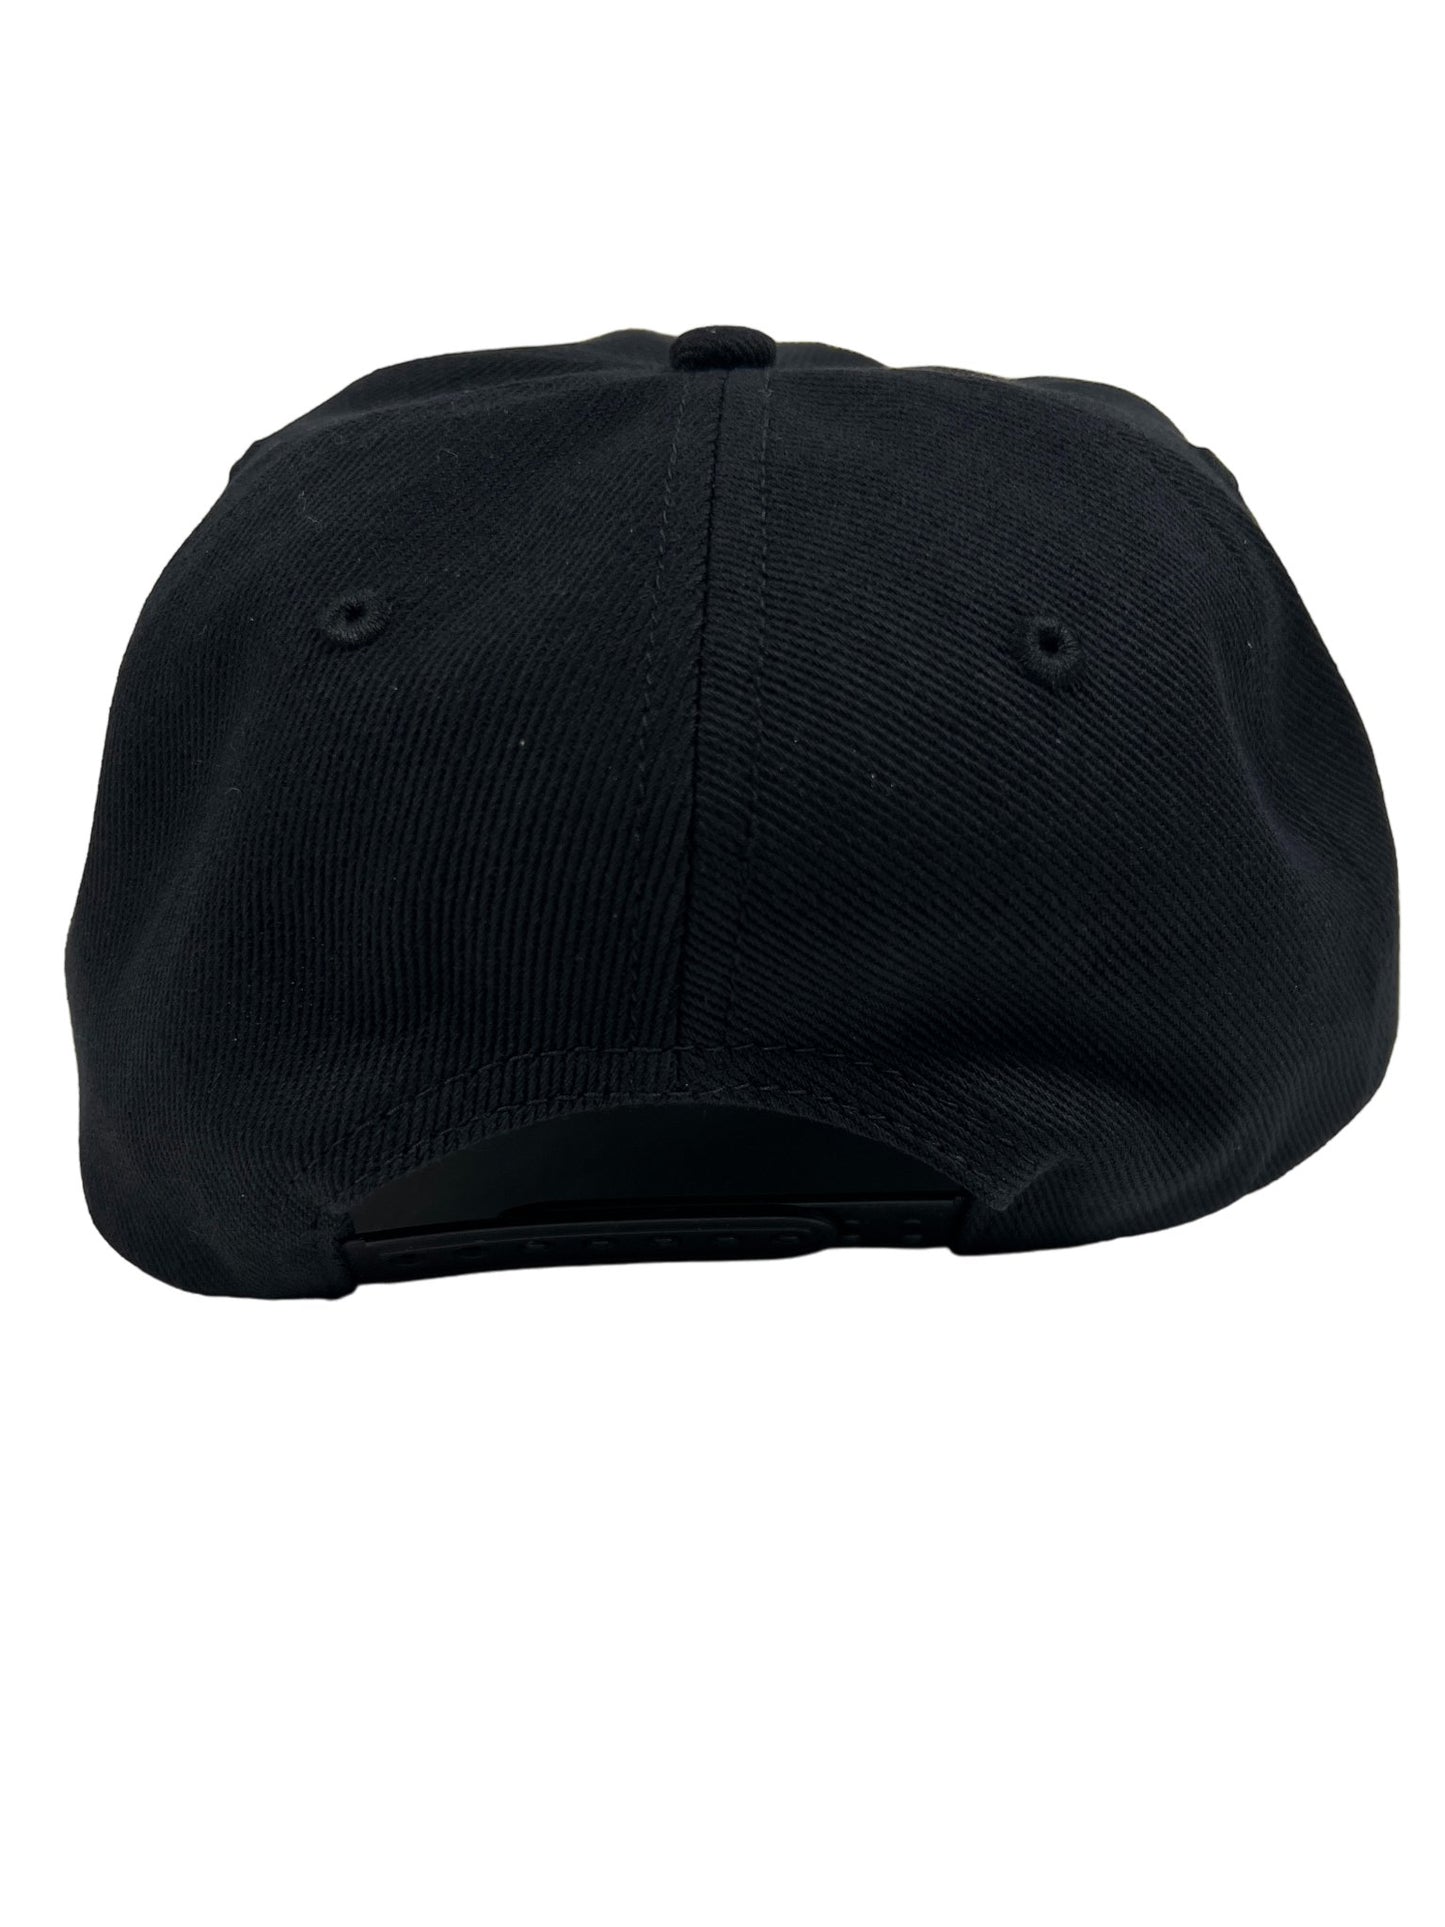 A trendy PLEASURES APPOINTMENT UNCONSTRUCTED SNAPBACK BLK hat on a white background.